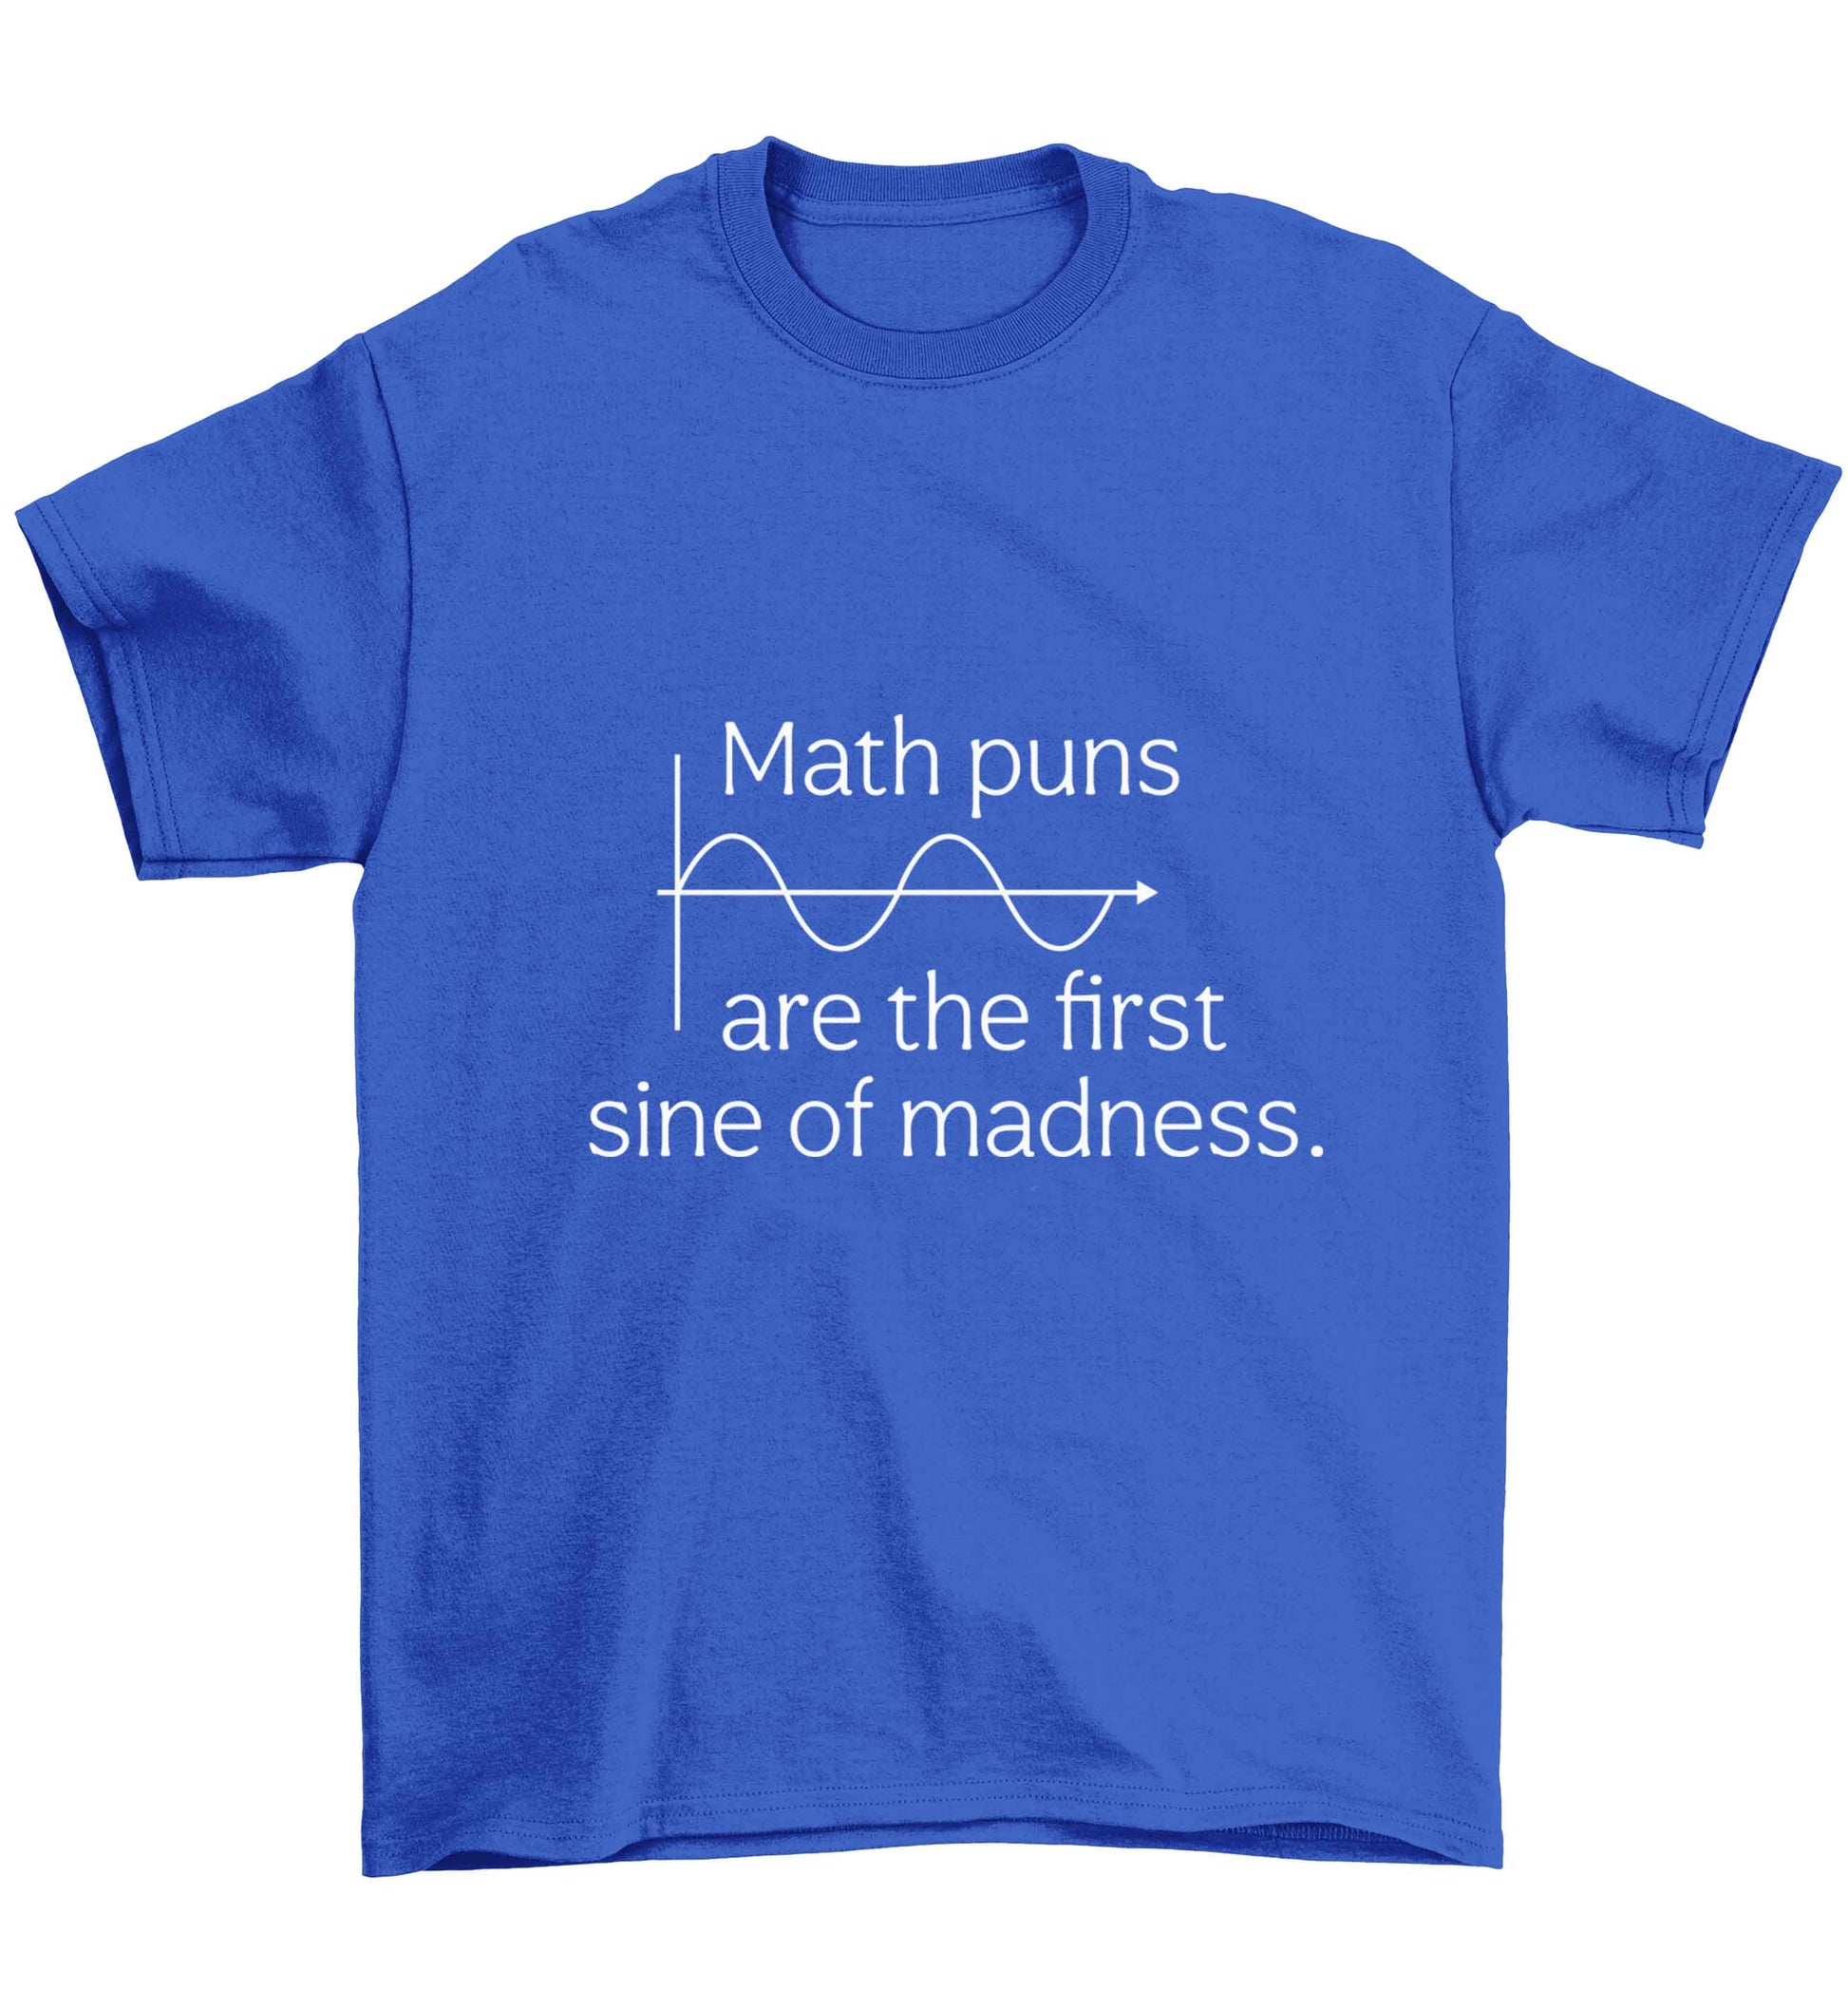 Math puns are the first sine of madness Children's blue Tshirt 12-13 Years